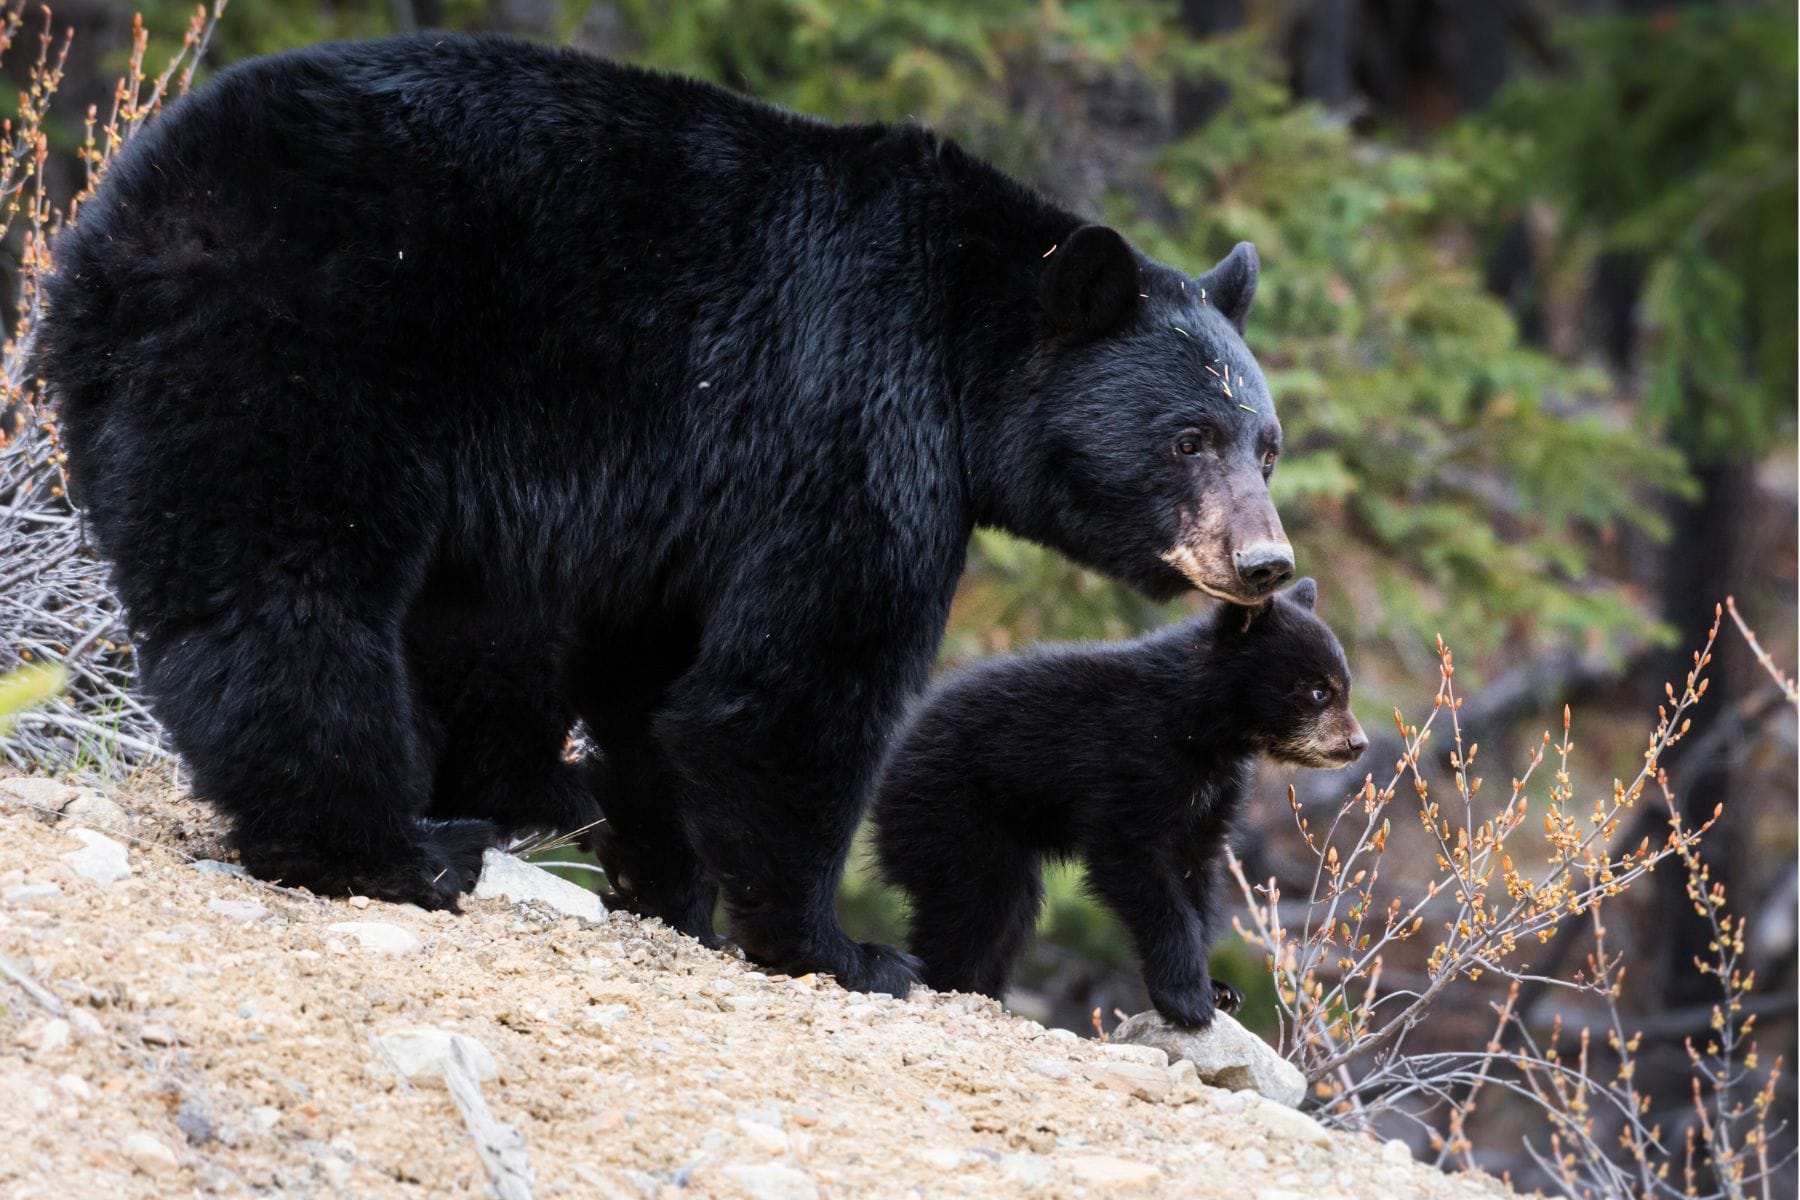 Image shows black bear and her cub